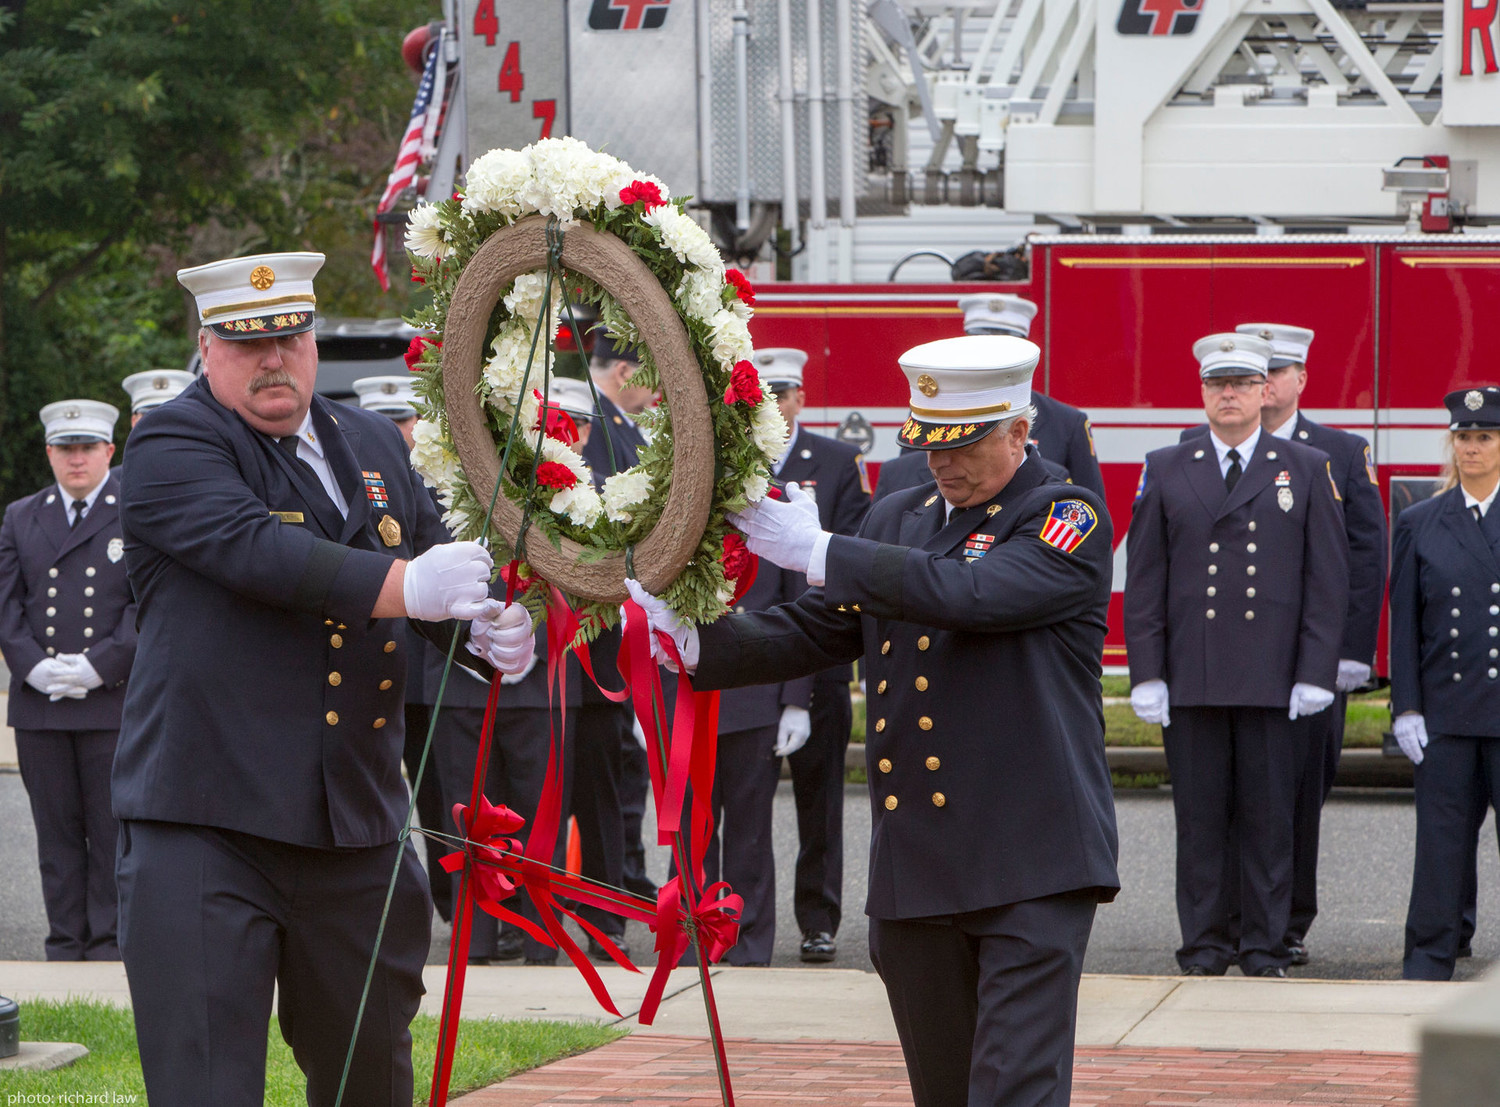 Rockville Centre fire chiefs Eric Burel and James Avondet carried a wreath to the memorial.